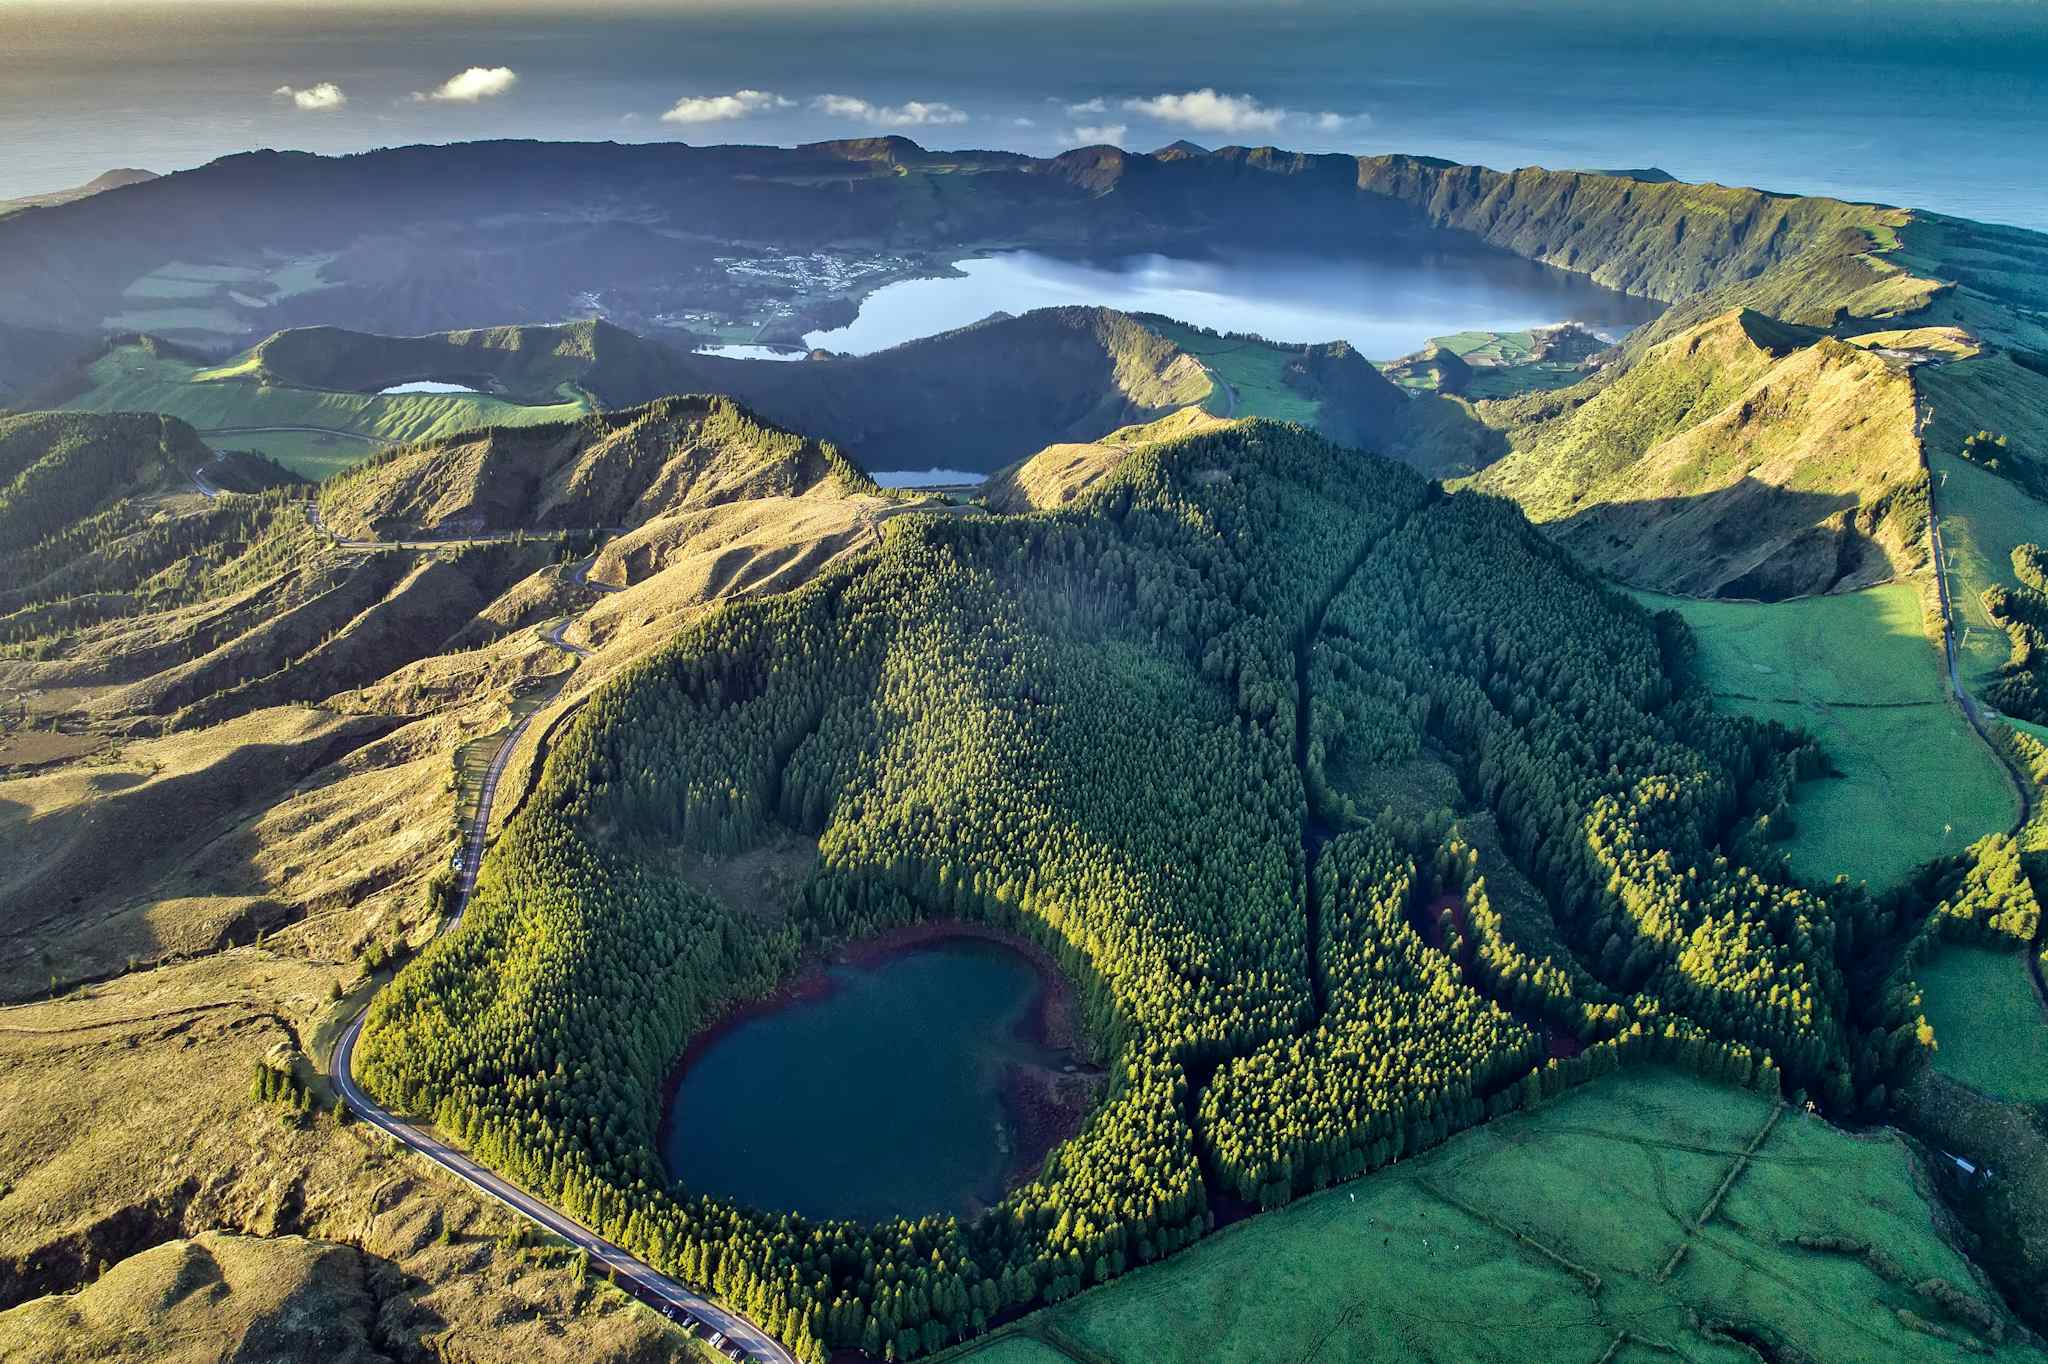 Futurismo - Hike, Canyon and Whale Watch in the Azores